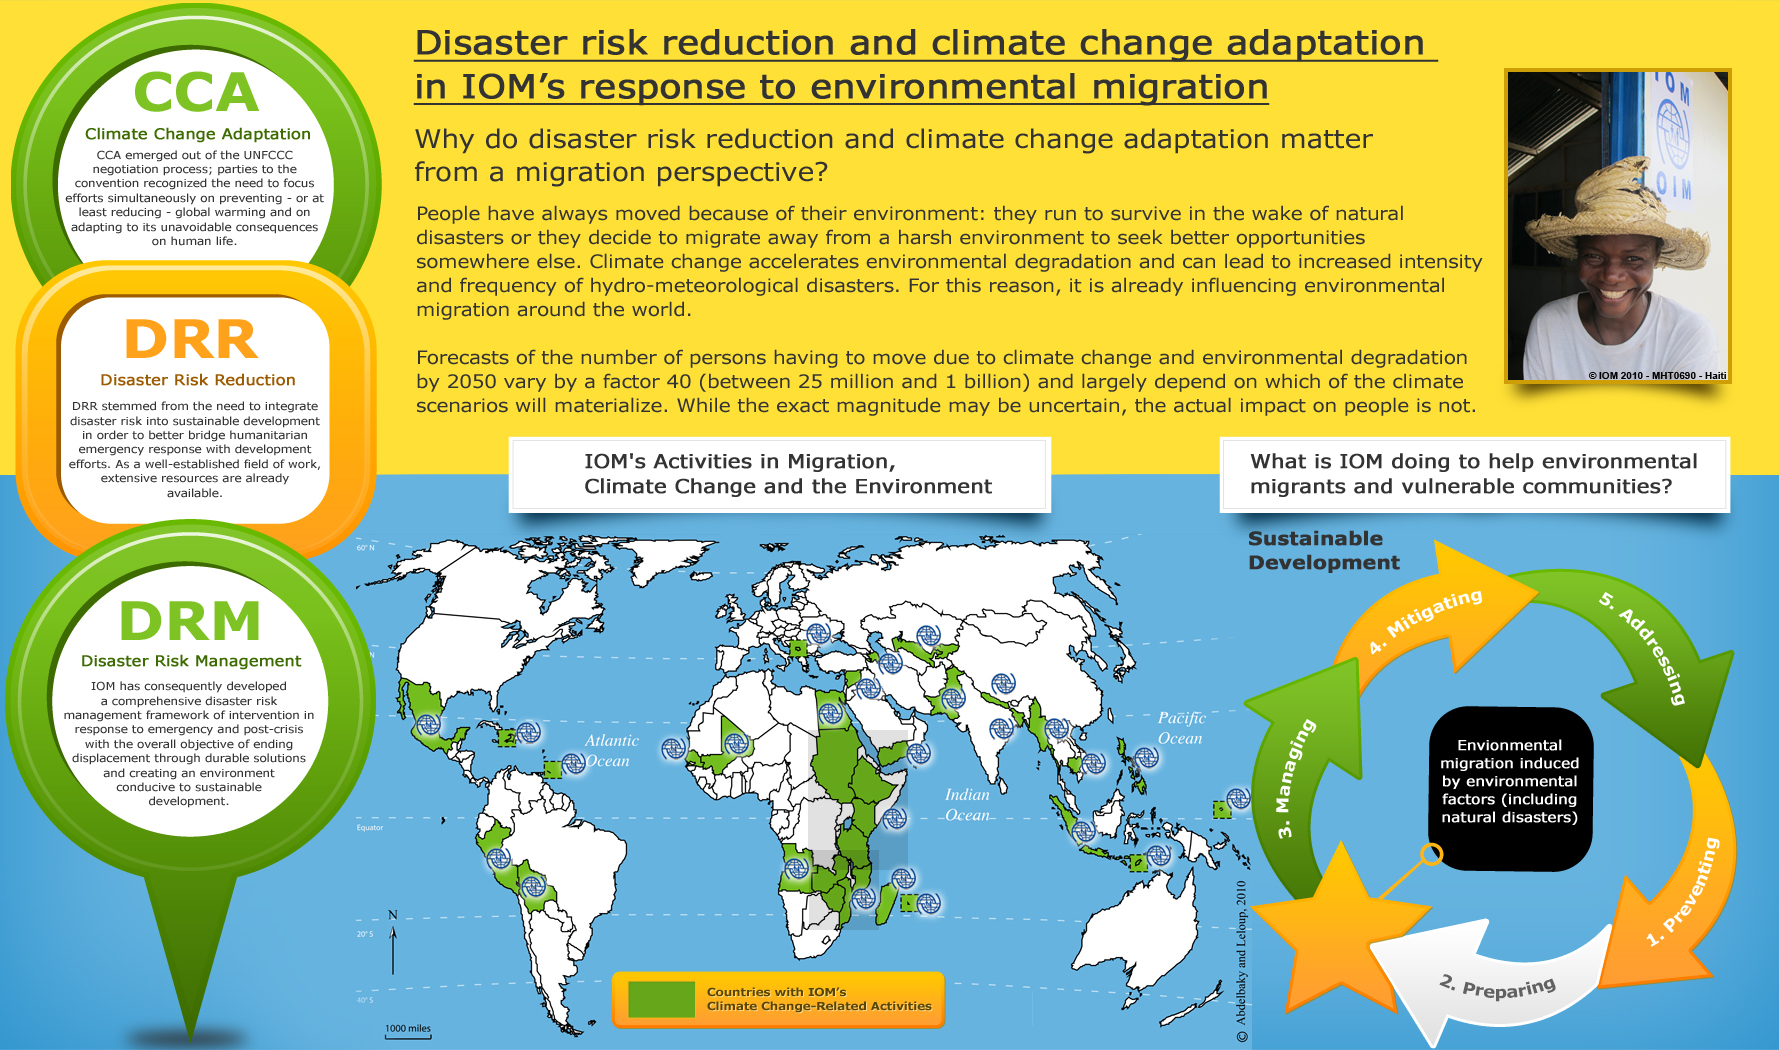 A Review Of The Global Climate Change Impacts, Adaptation